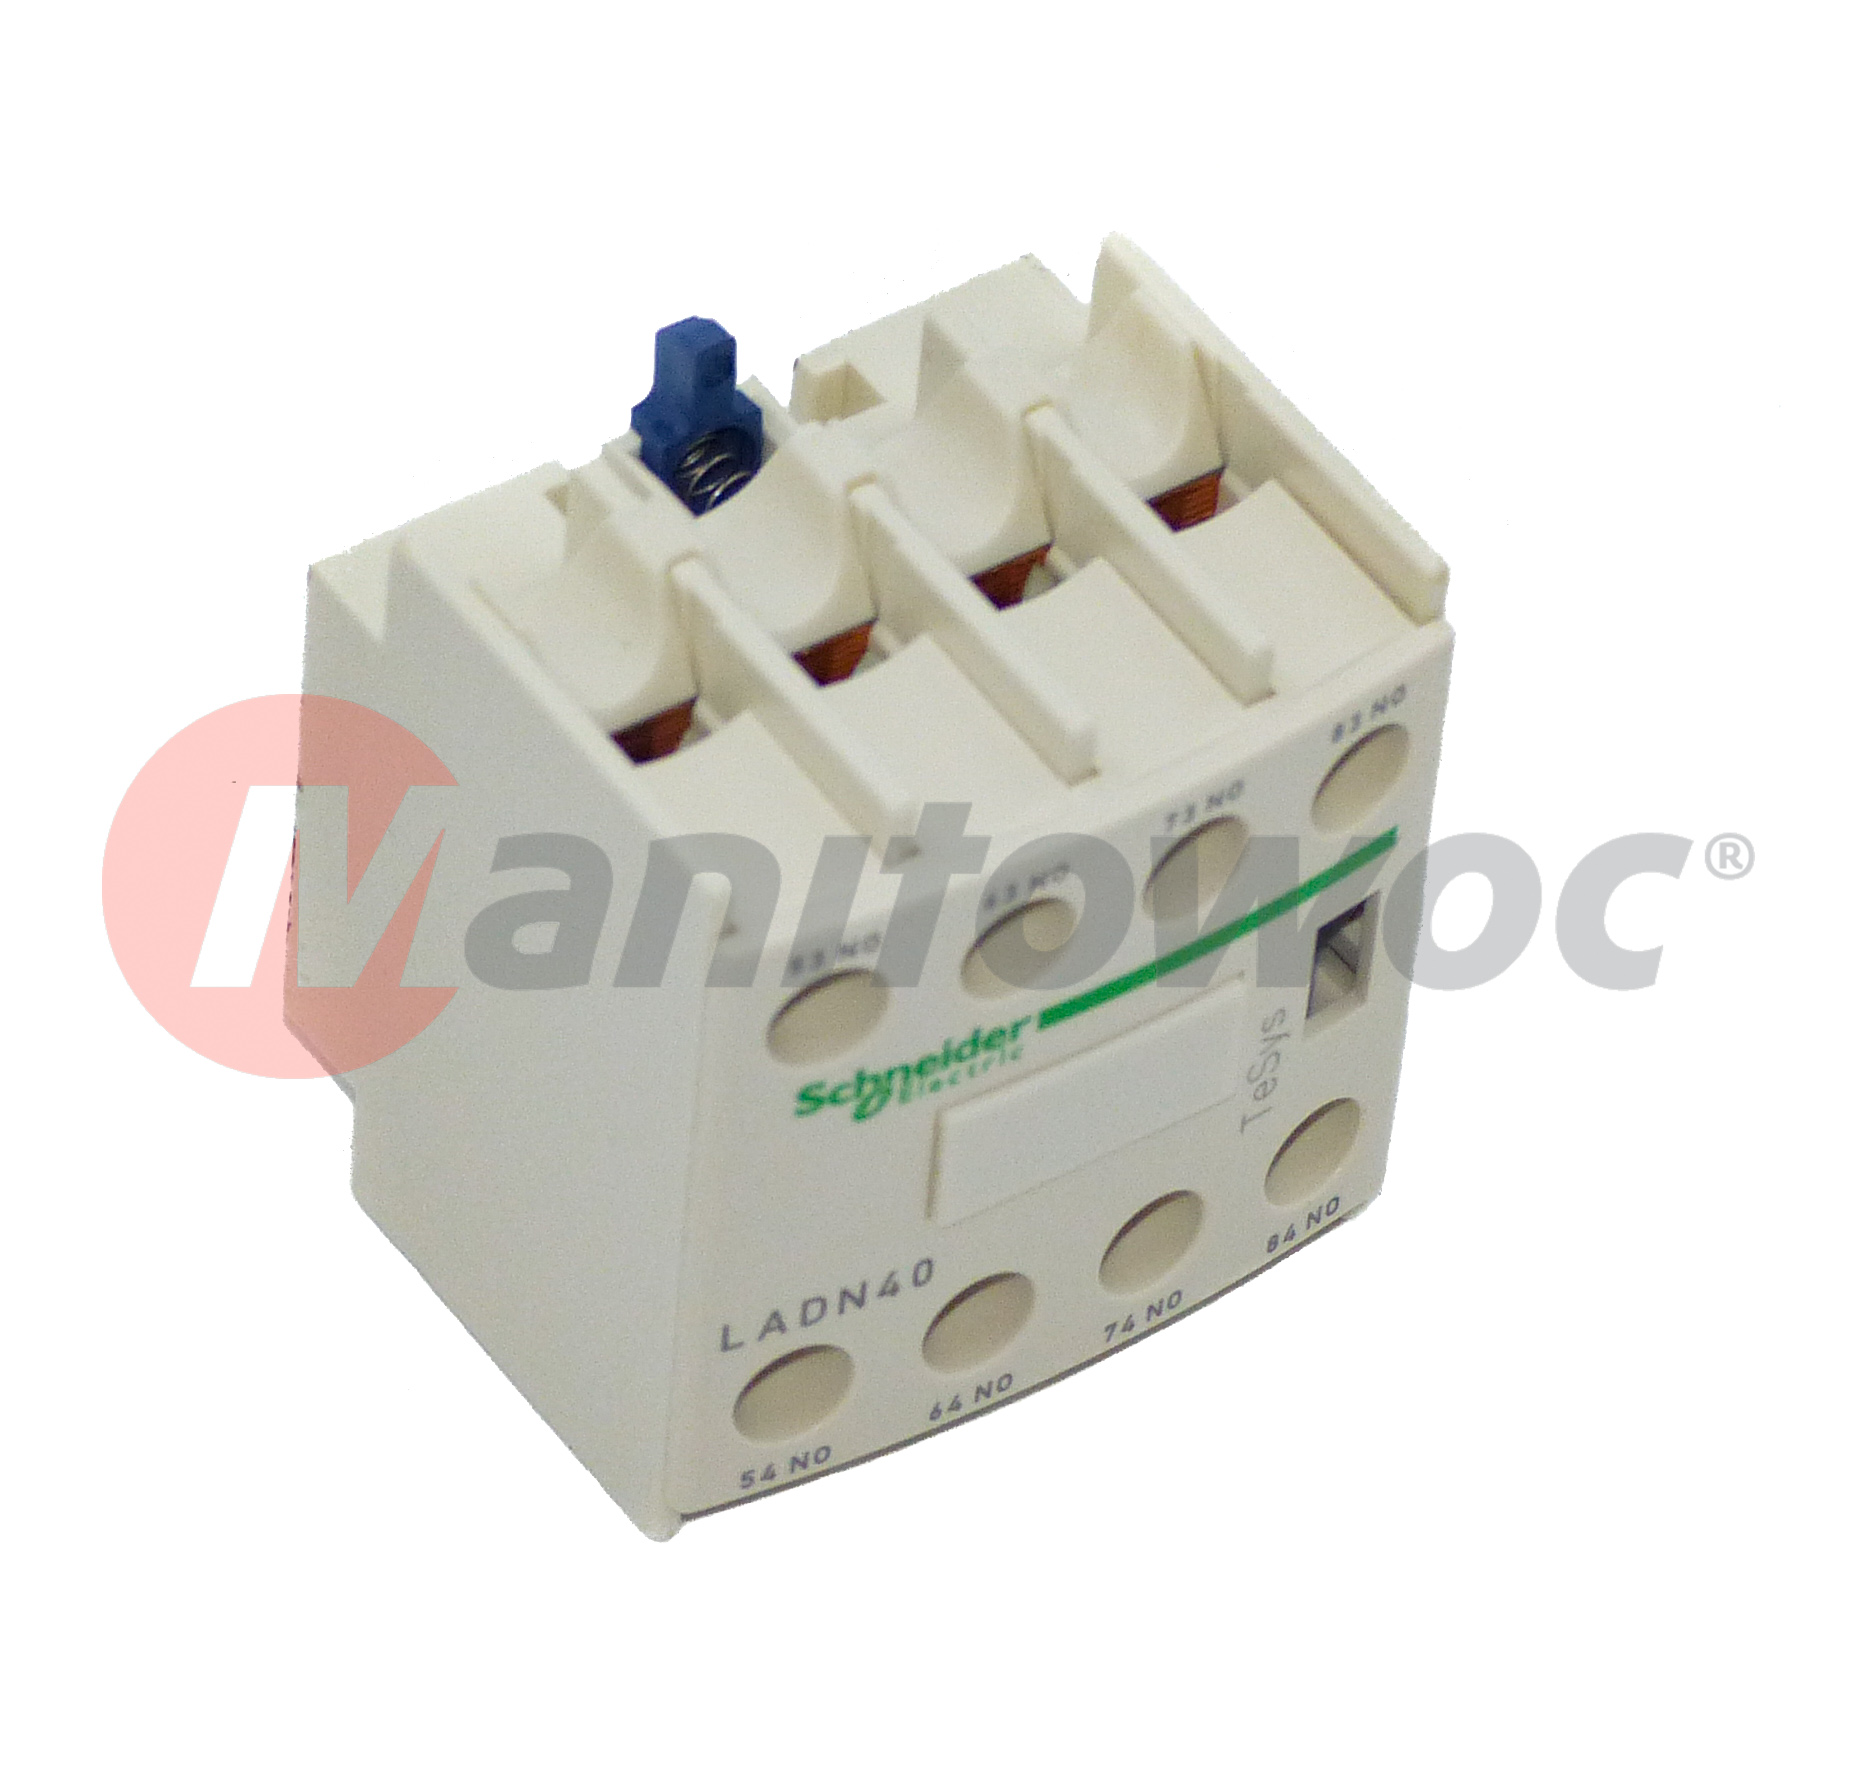 8 700 1022 - AUXILIARY BLOCK 2F+20 FRONT